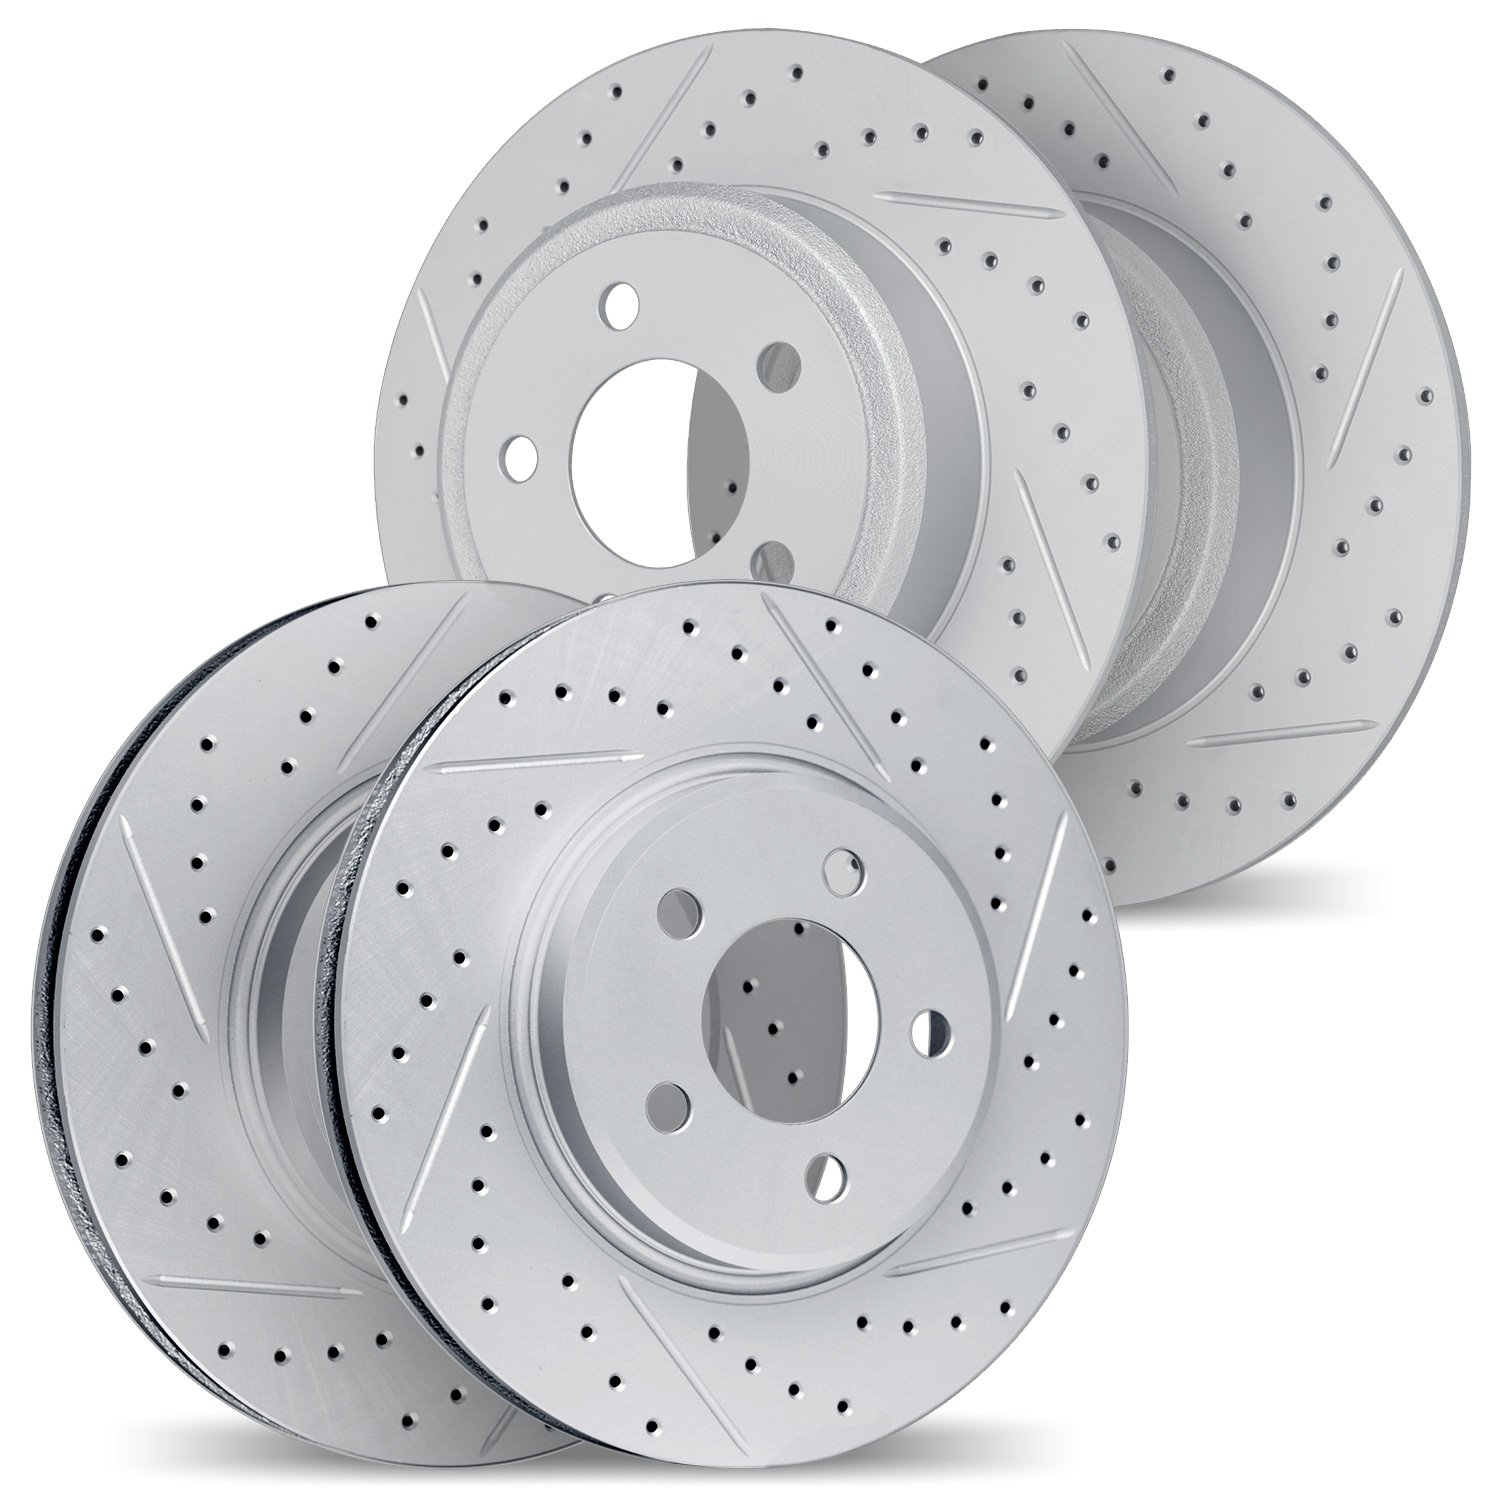 2004-03020 Geoperformance Drilled/Slotted Brake Rotors, Fits Select Kia/Hyundai/Genesis, Position: Front and Rear